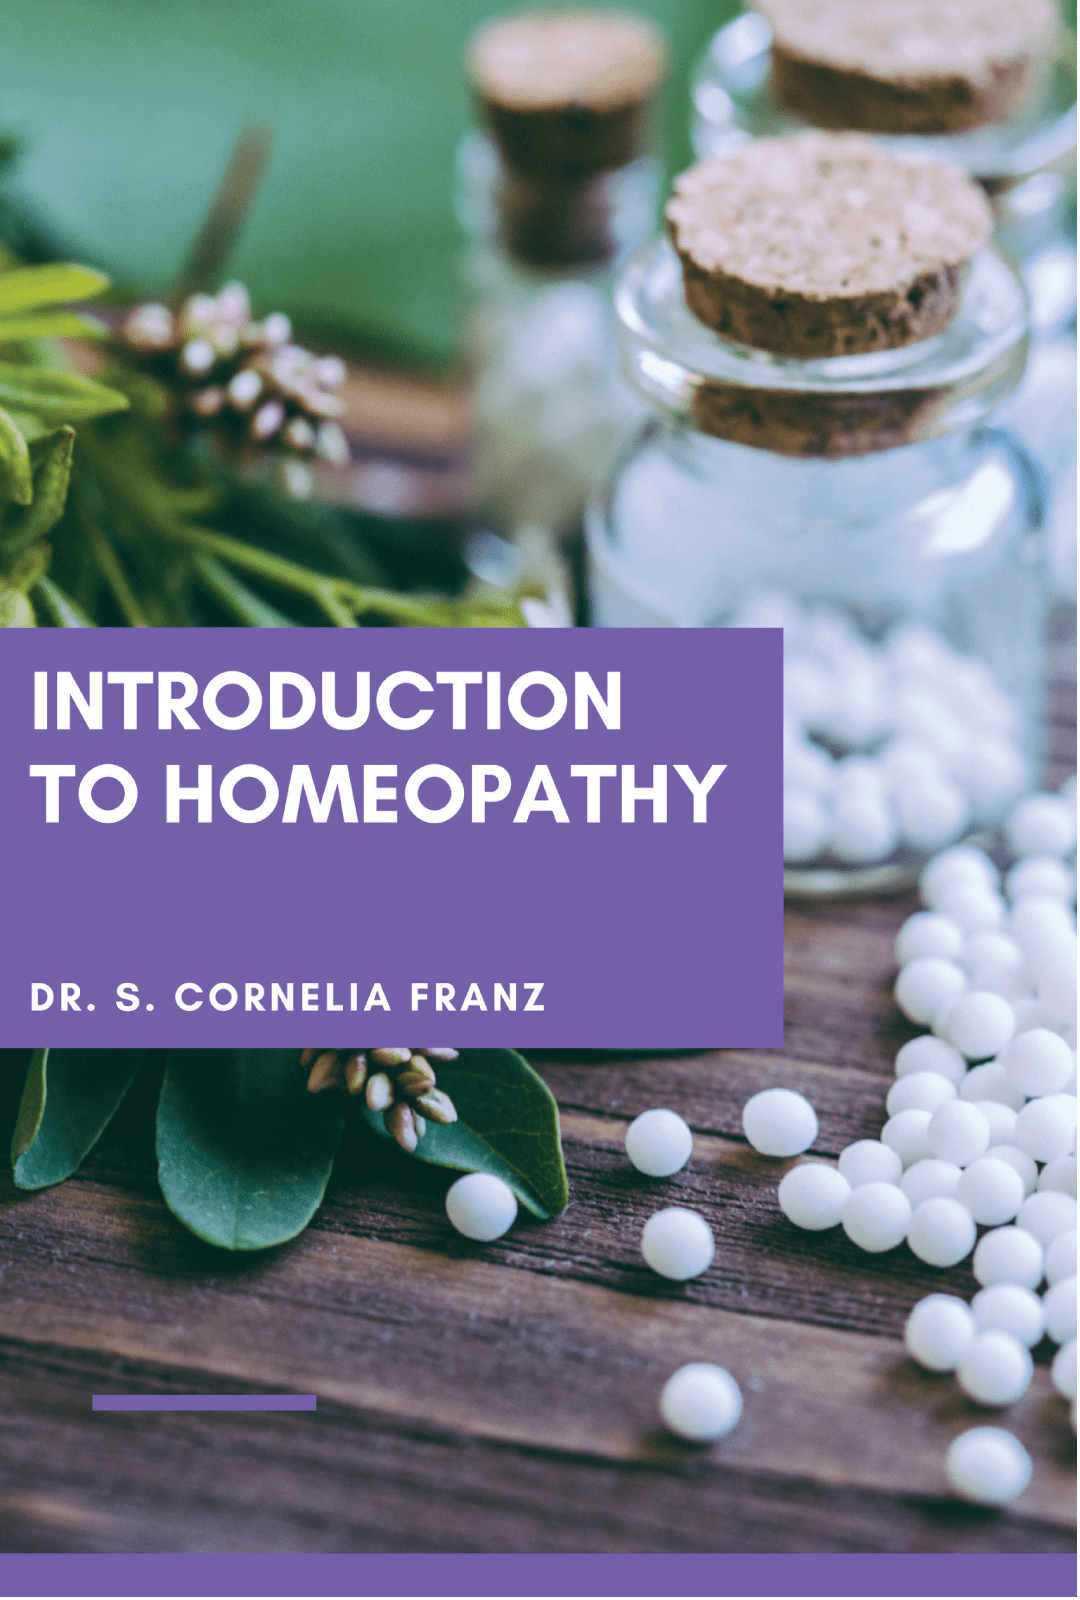 homeopathy-video-poster